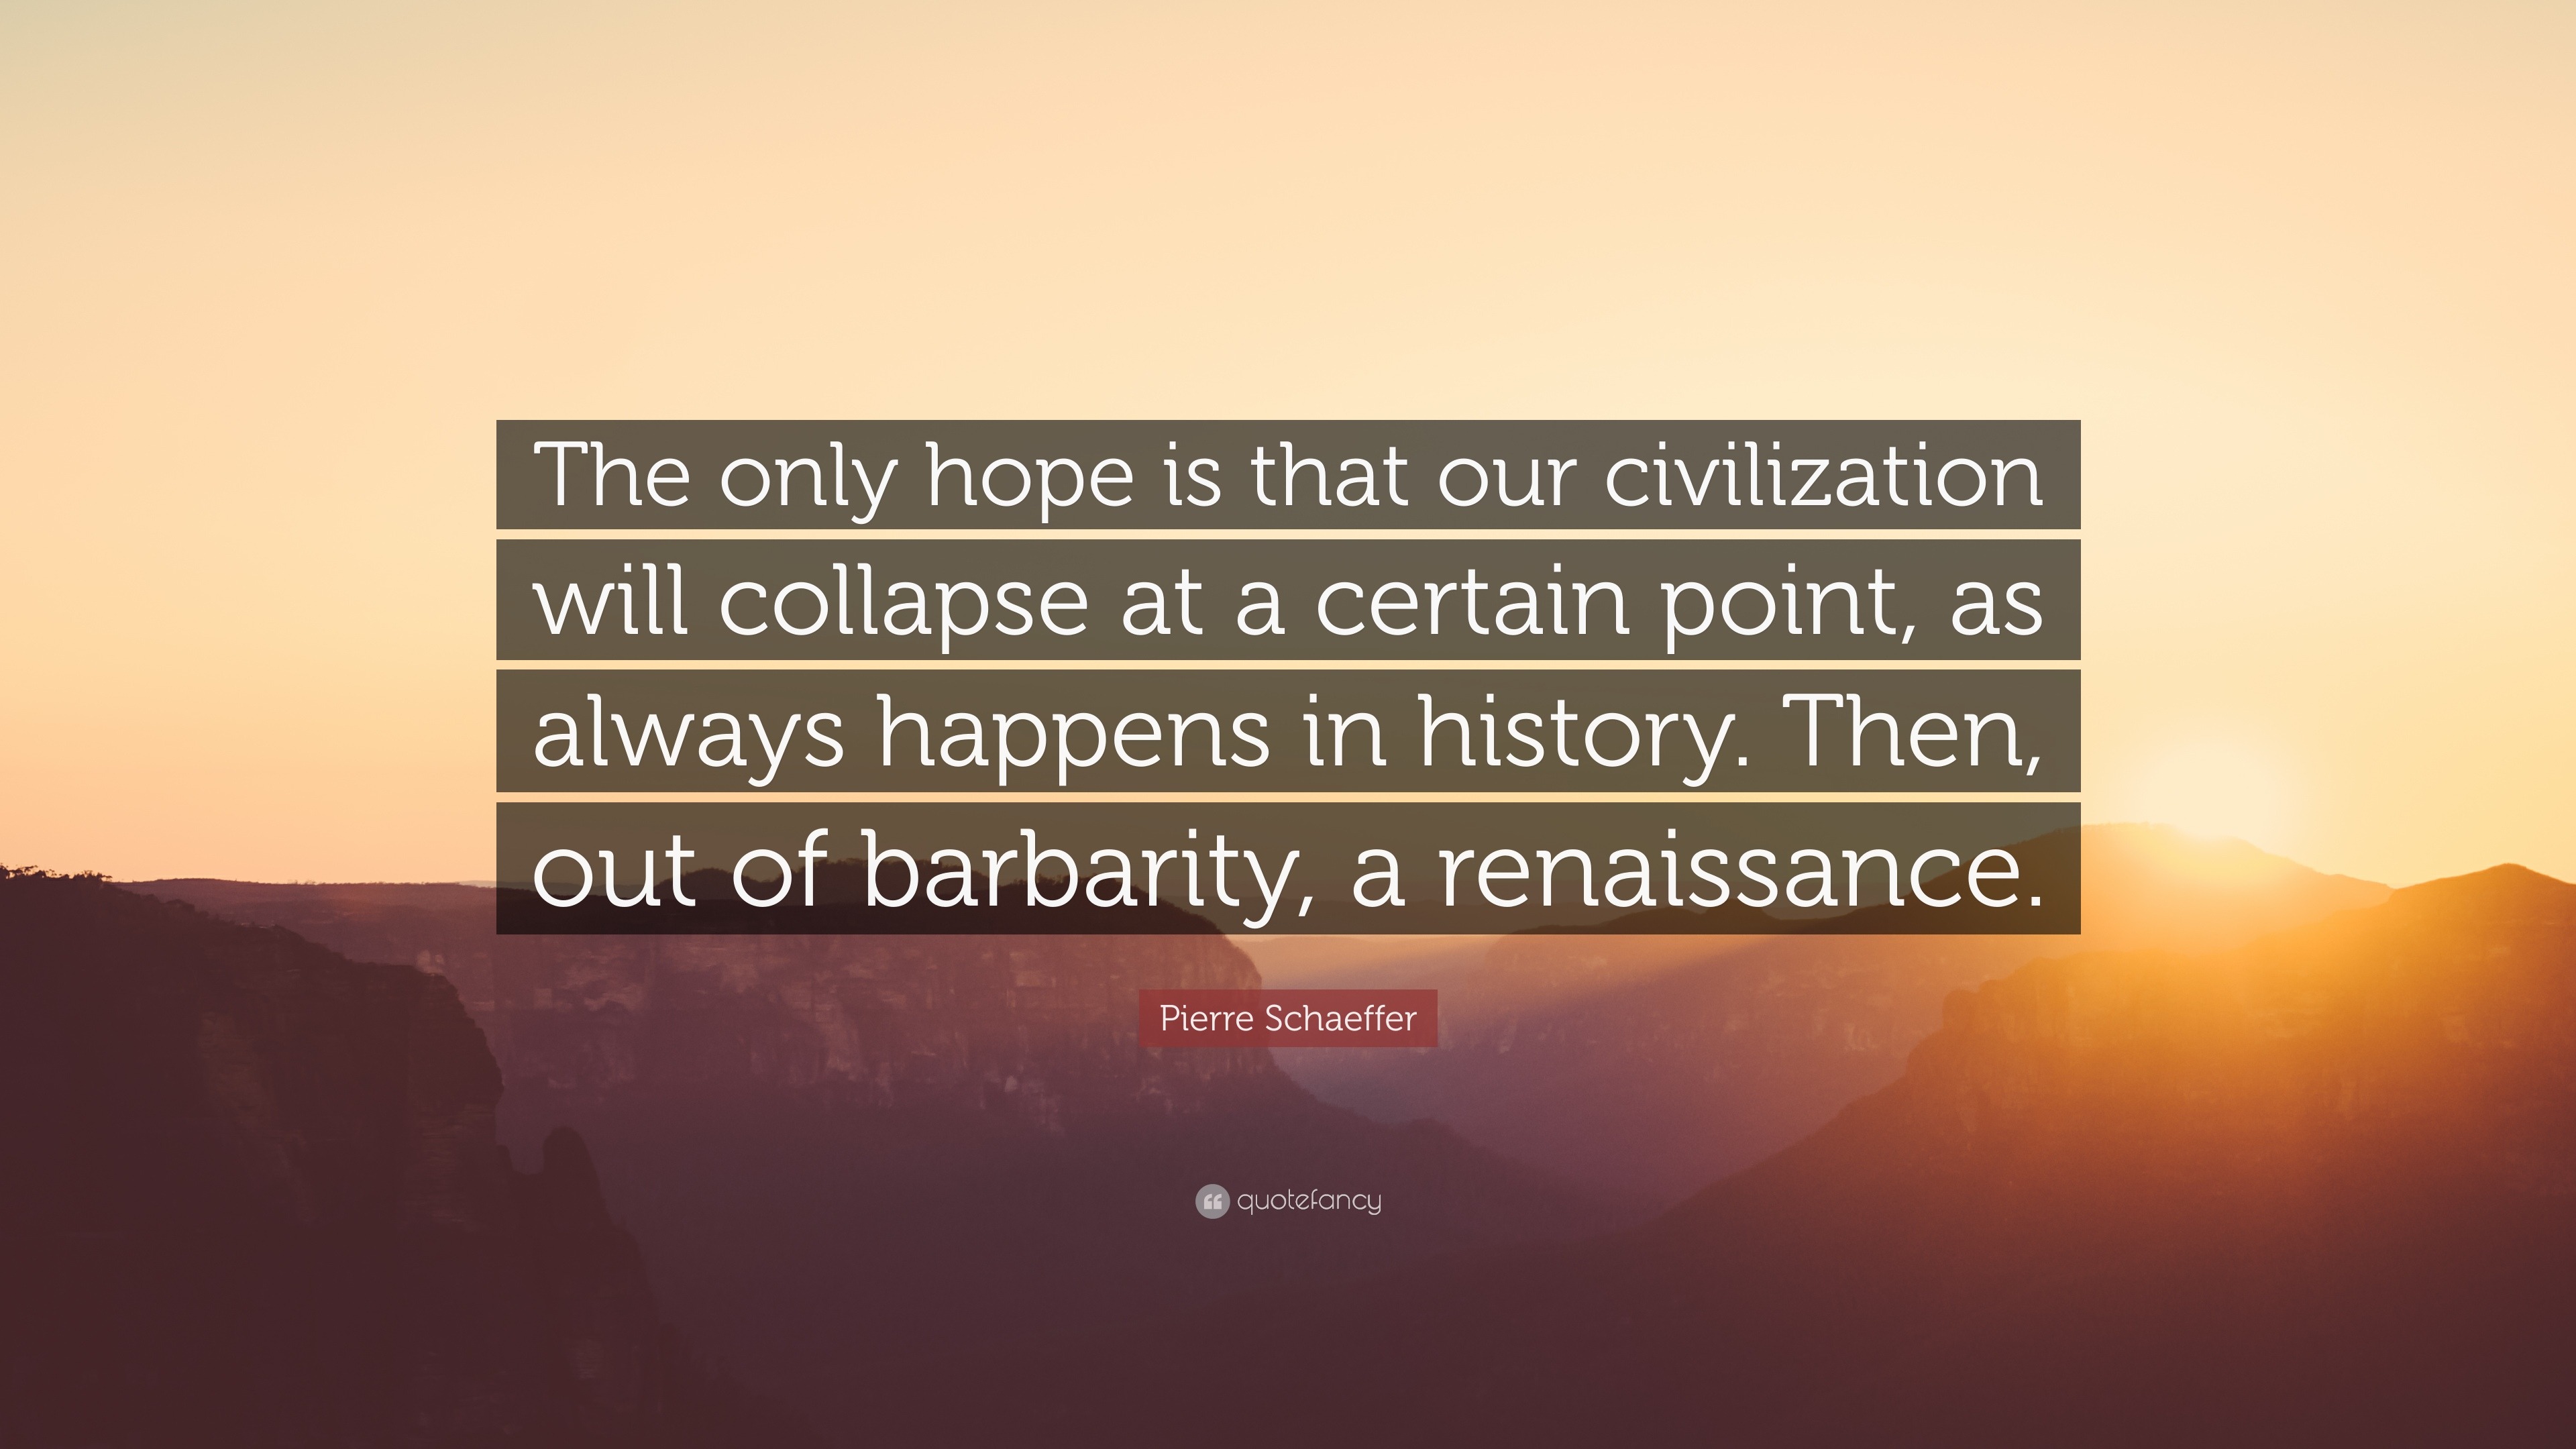 Hope civilization doesn't collapse. - 9GAG